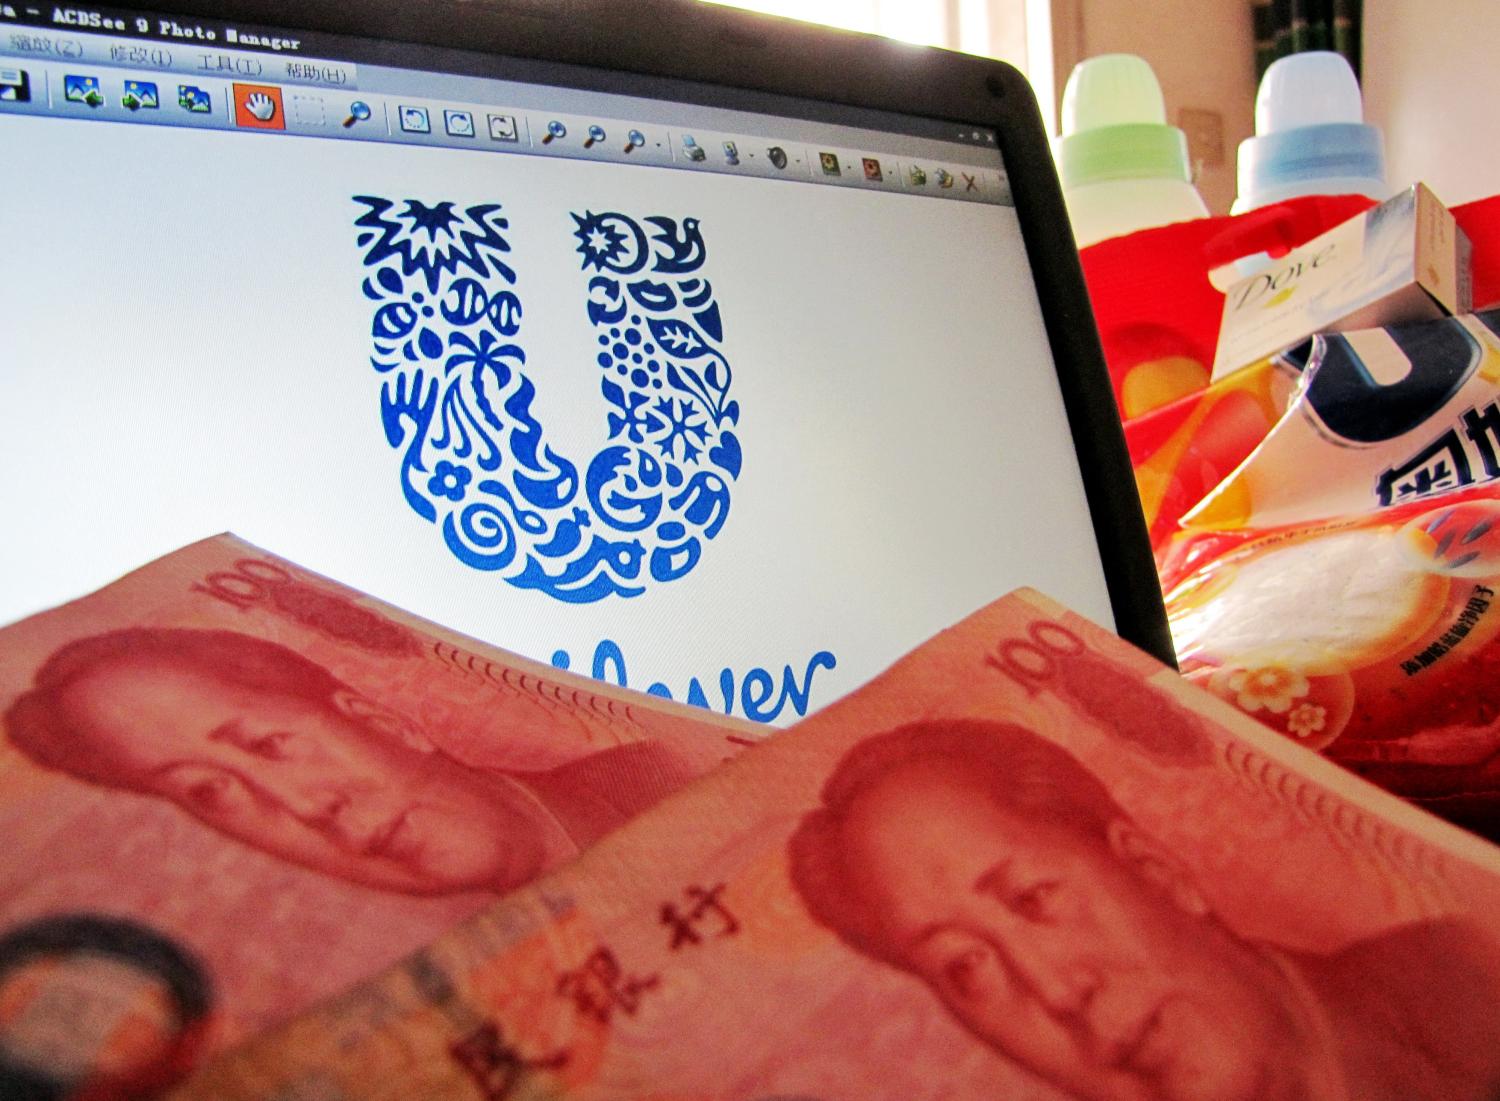 --FILE--A Unilever logo is seen on a computer screen as well as hundred Renminbi note in Shanghai, China, 06 May 2011. The Chinese government is getting tough in its fight to tame inflation, fining a foreign company more than $300,000 just for talking about its plans to raise prices.The Anglo-Dutch company Unilever spokesman announced in March that rising costs of materials might lead the firm to increase the prices of its toiletries and other products by as much as 15 percent, which sparked a run on Unilever products and hoarding that disrupted market prices.Unilever, which recently said it hoped to boost its sales of $2 billion a year in China fivefold by 2020, accepted its costly punishment. No Use China. No Use France.